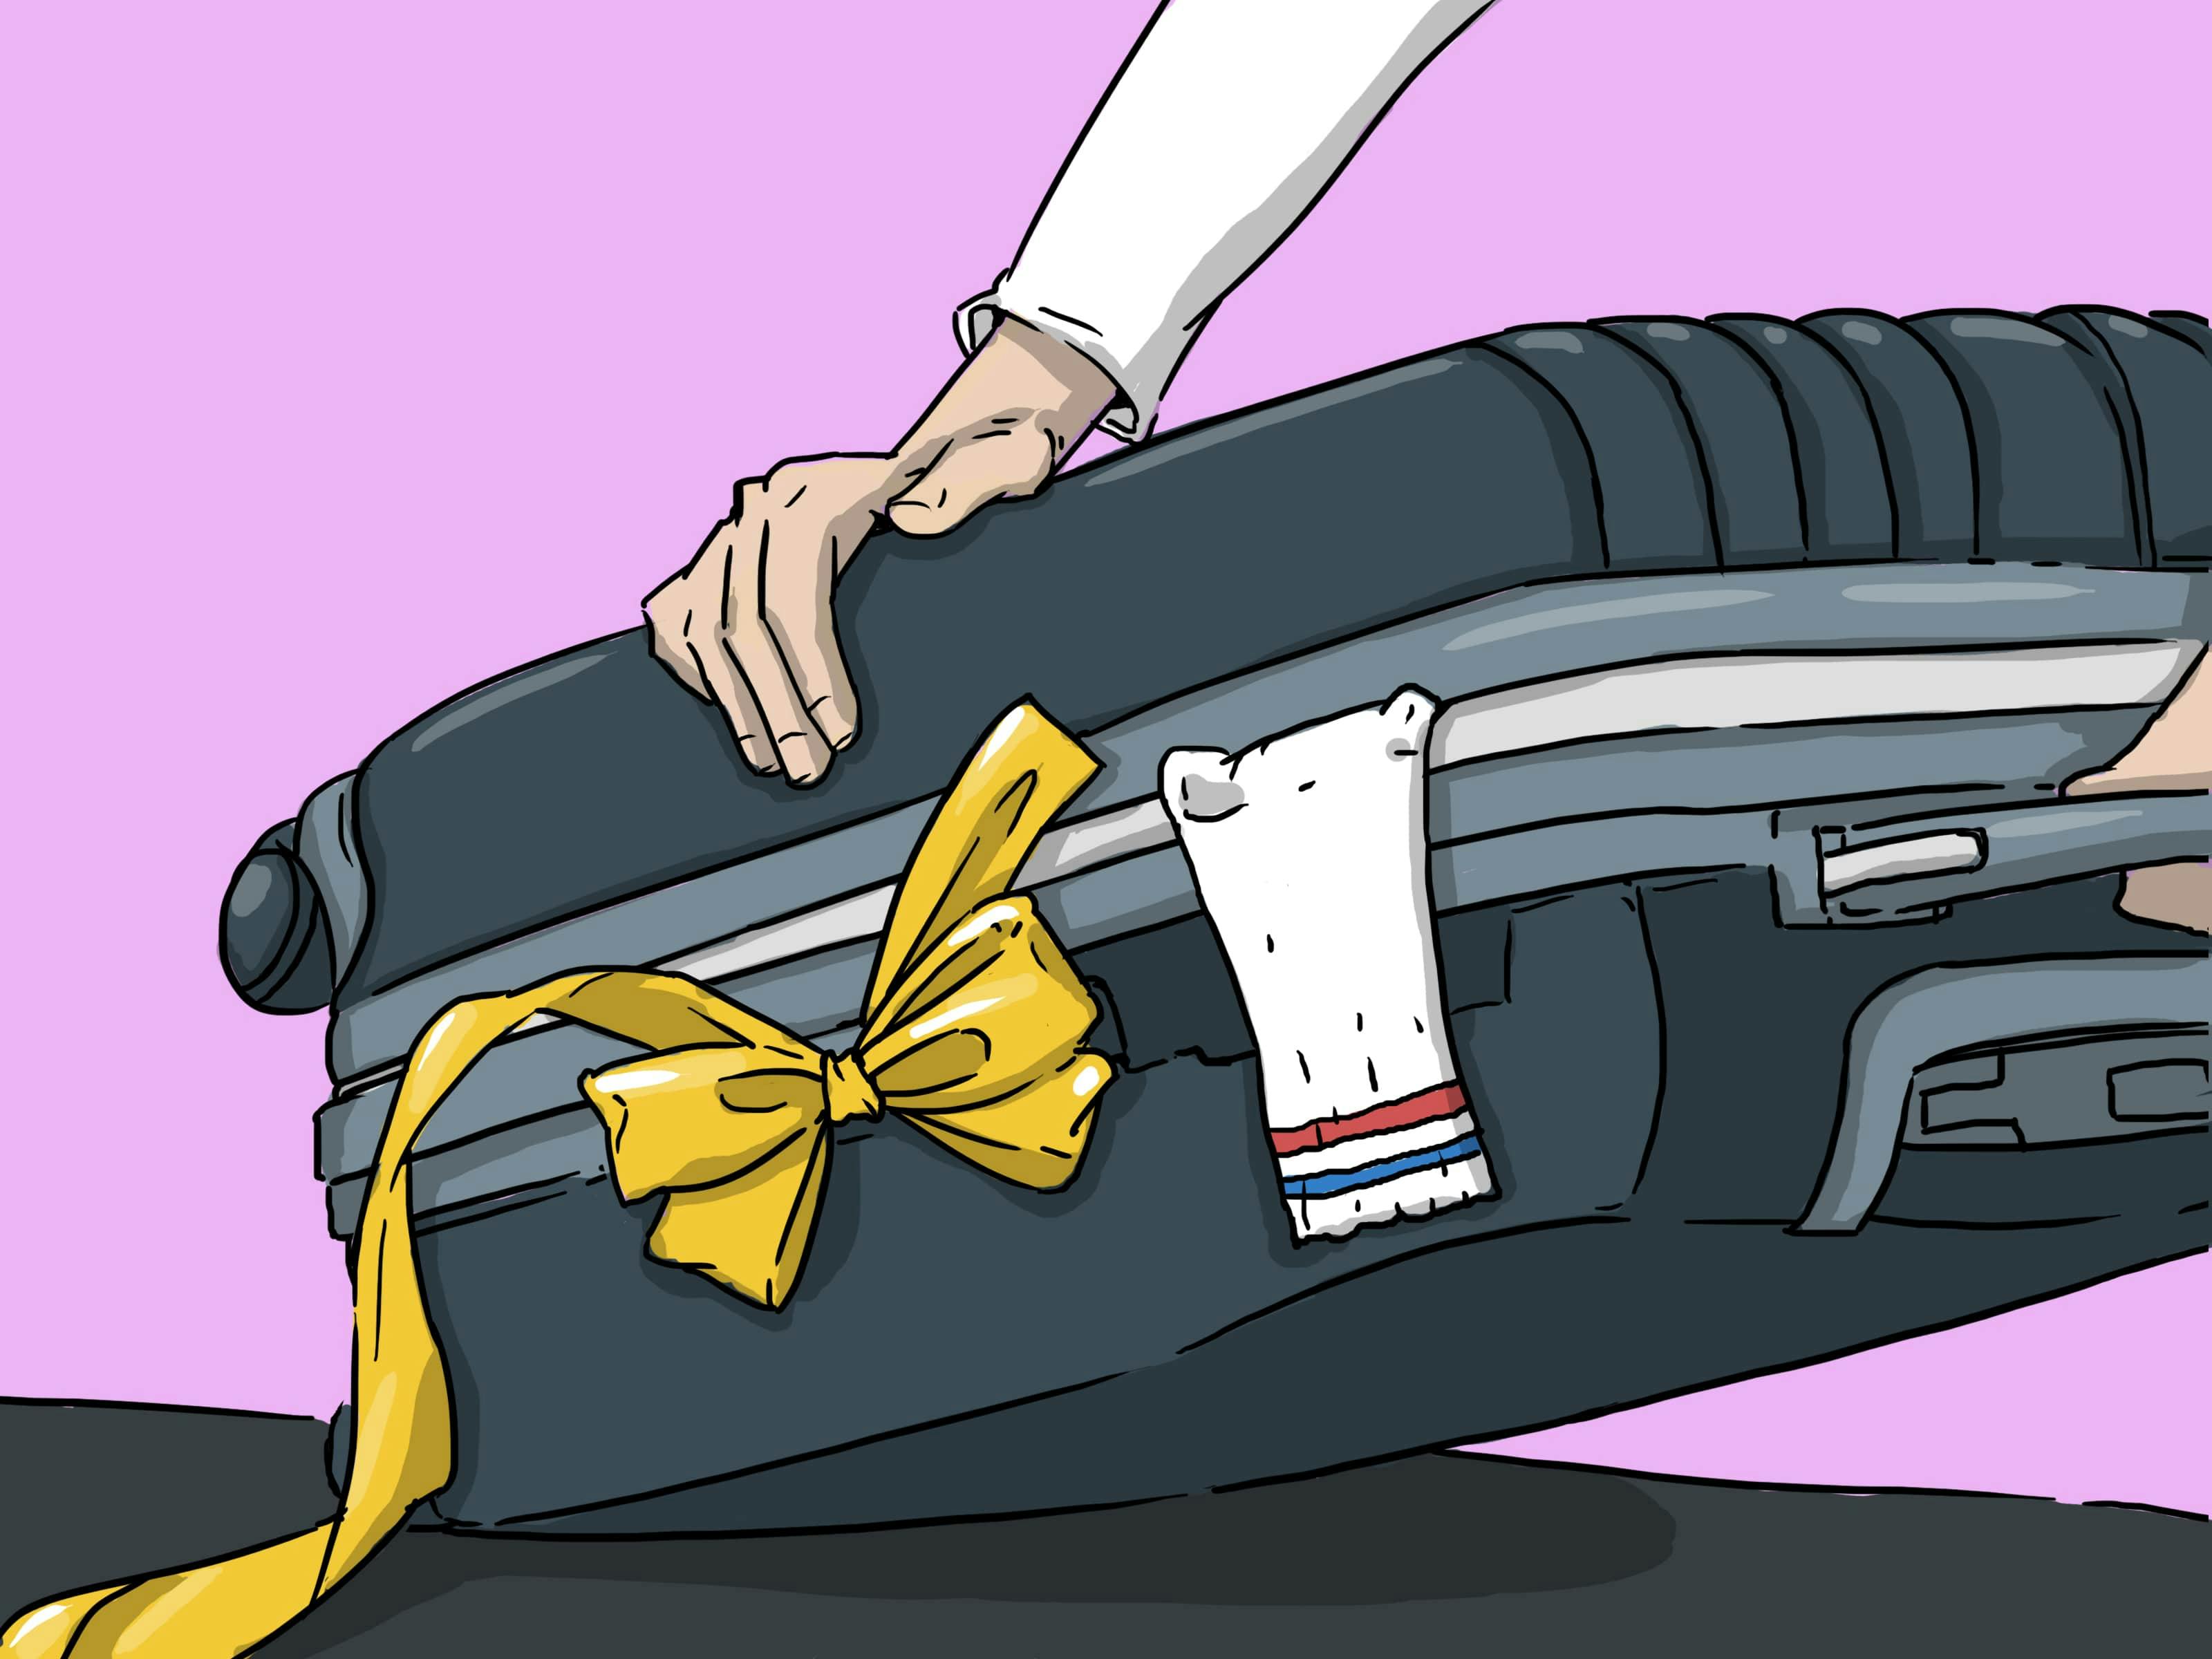 A bow and sock attached to your suitcase makes it easier to spot in a sea of luggage.